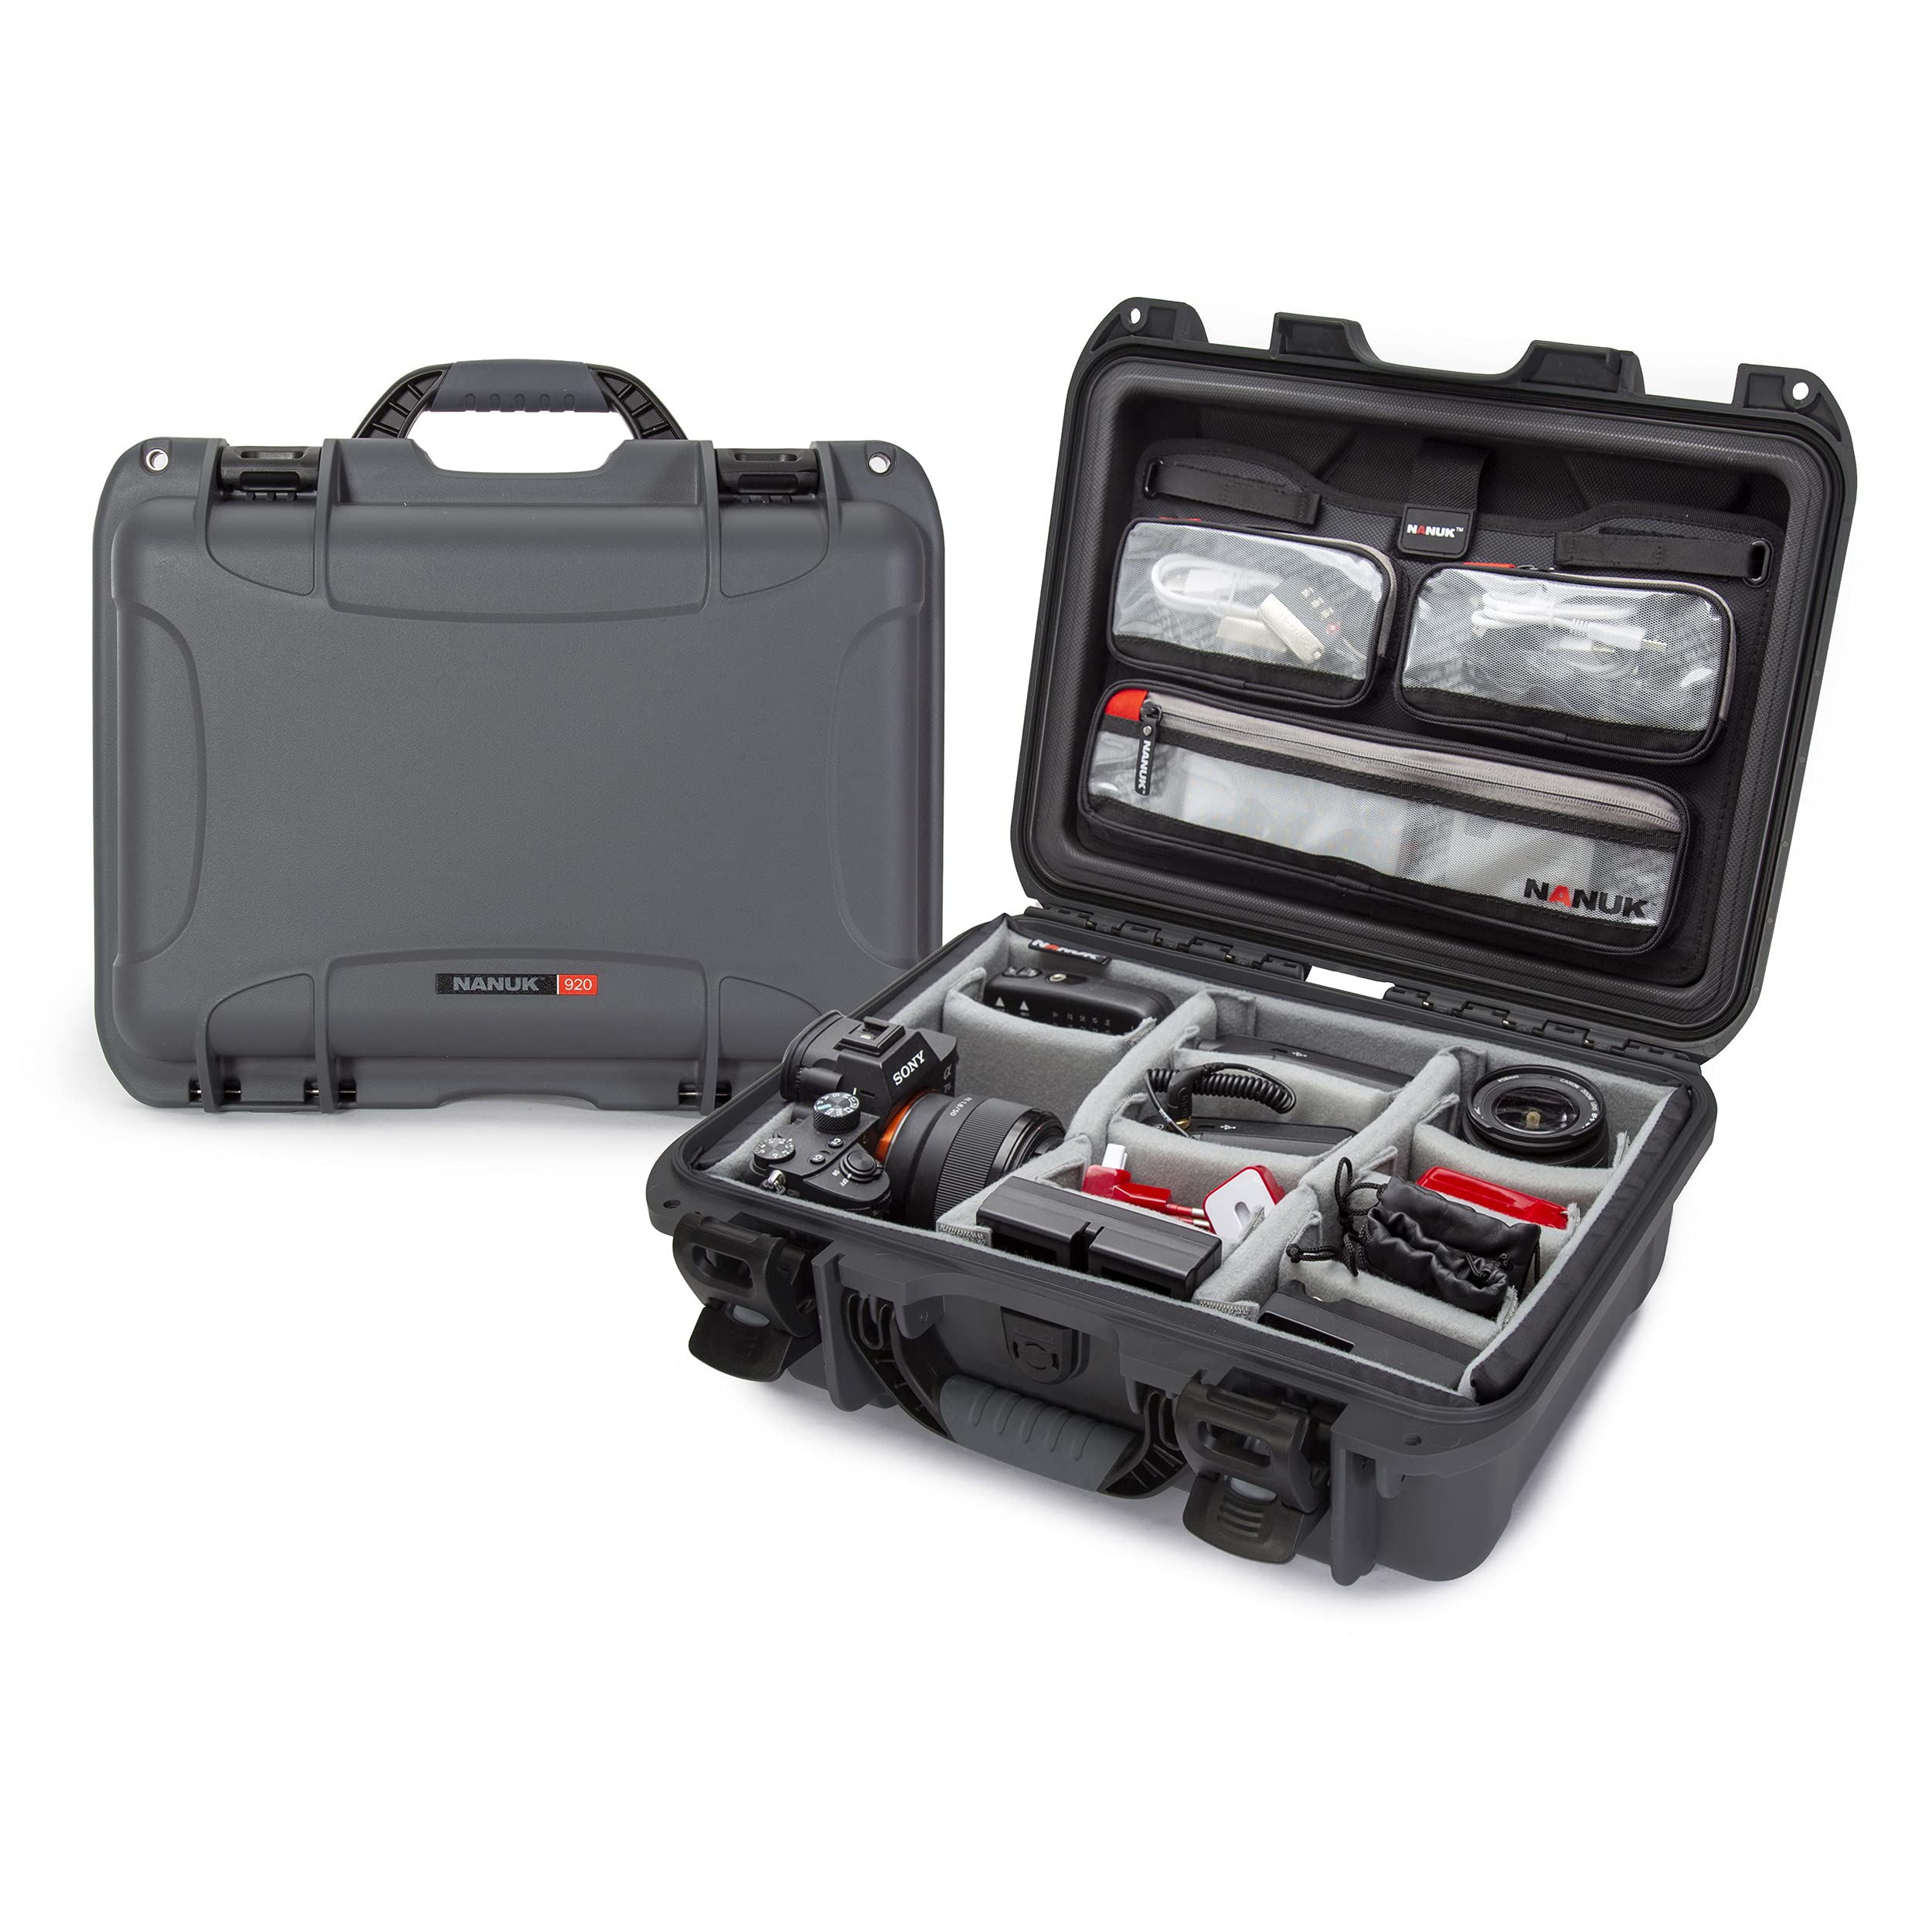 Nanuk 920 Waterproof Hard Case with Lid Organizer and Padded Divider - Graphite